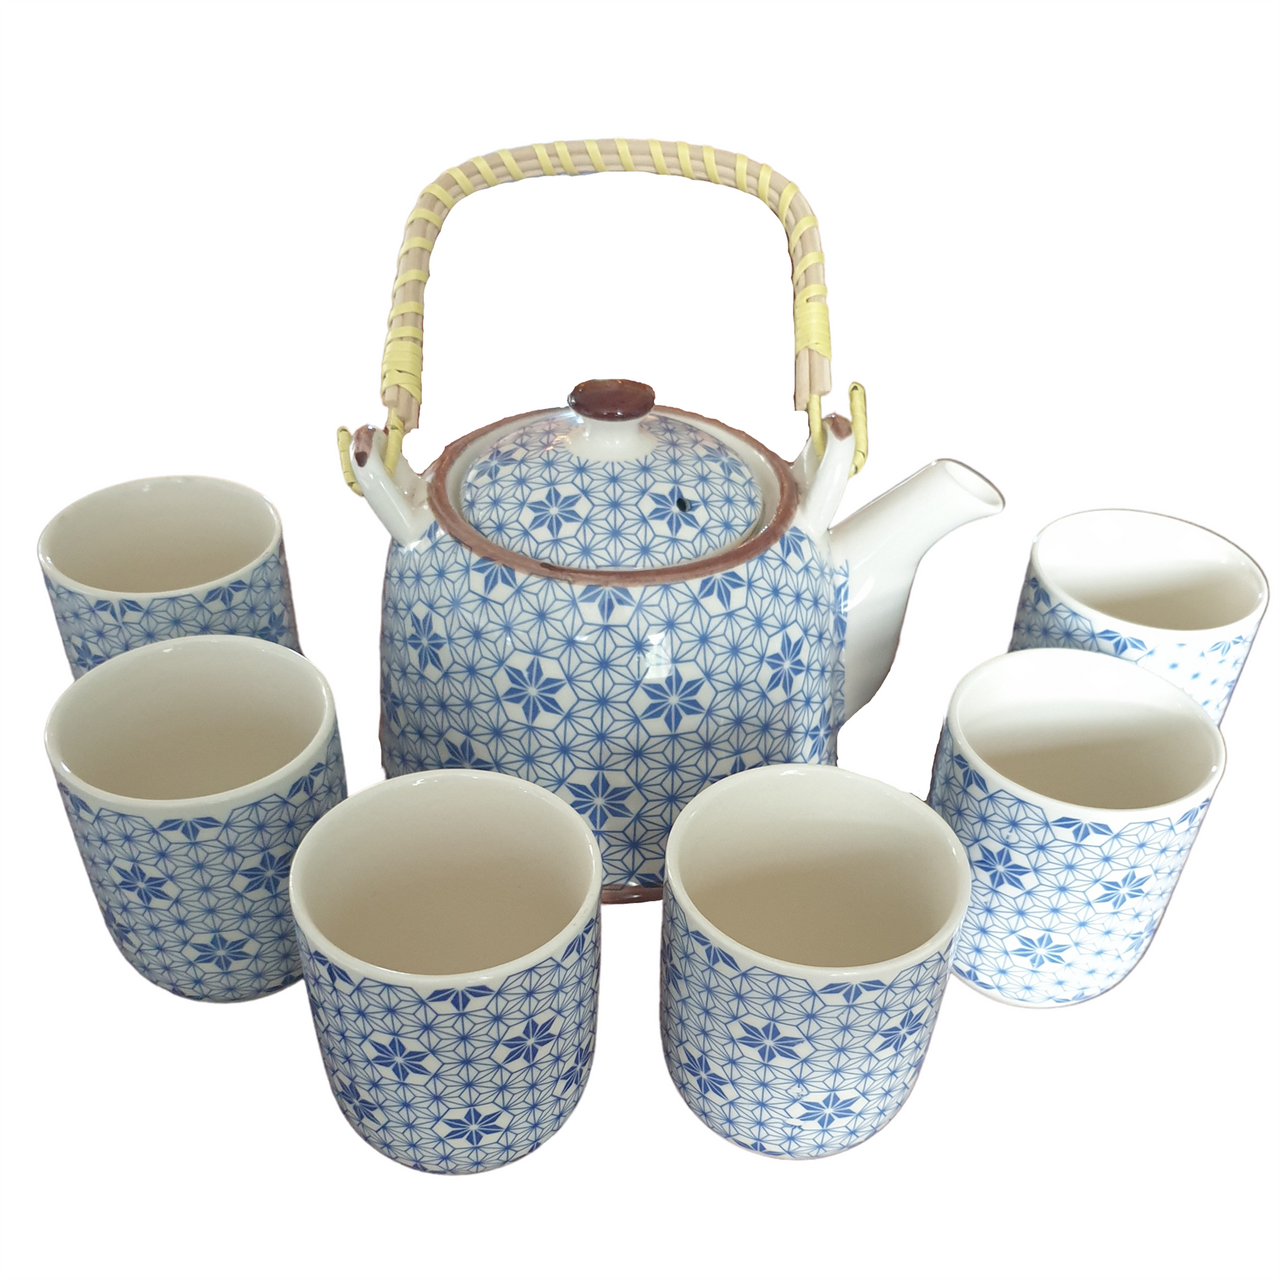 Chinese Herbal Tea Set - Blue Star Pattern - 6 Cups and Infuser - Boxed